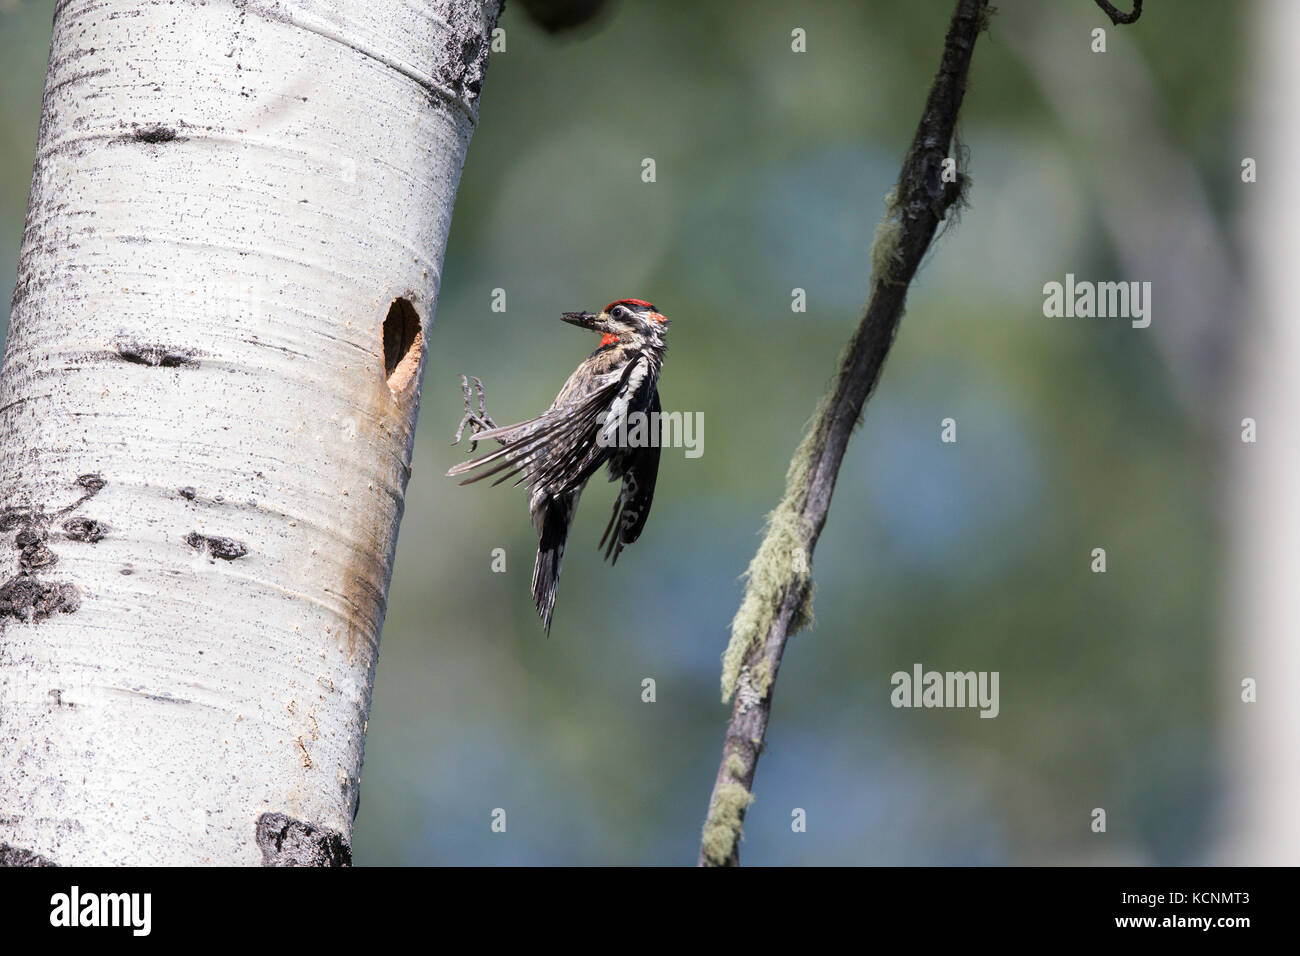 Red-naped sapsucker (Sphyrapicus nuchalis), female, flying to nest cavity in trembling aspen (Populus tremuloides), with insects for chicks, Cariboo Region, British Columbia, Canada Stock Photo